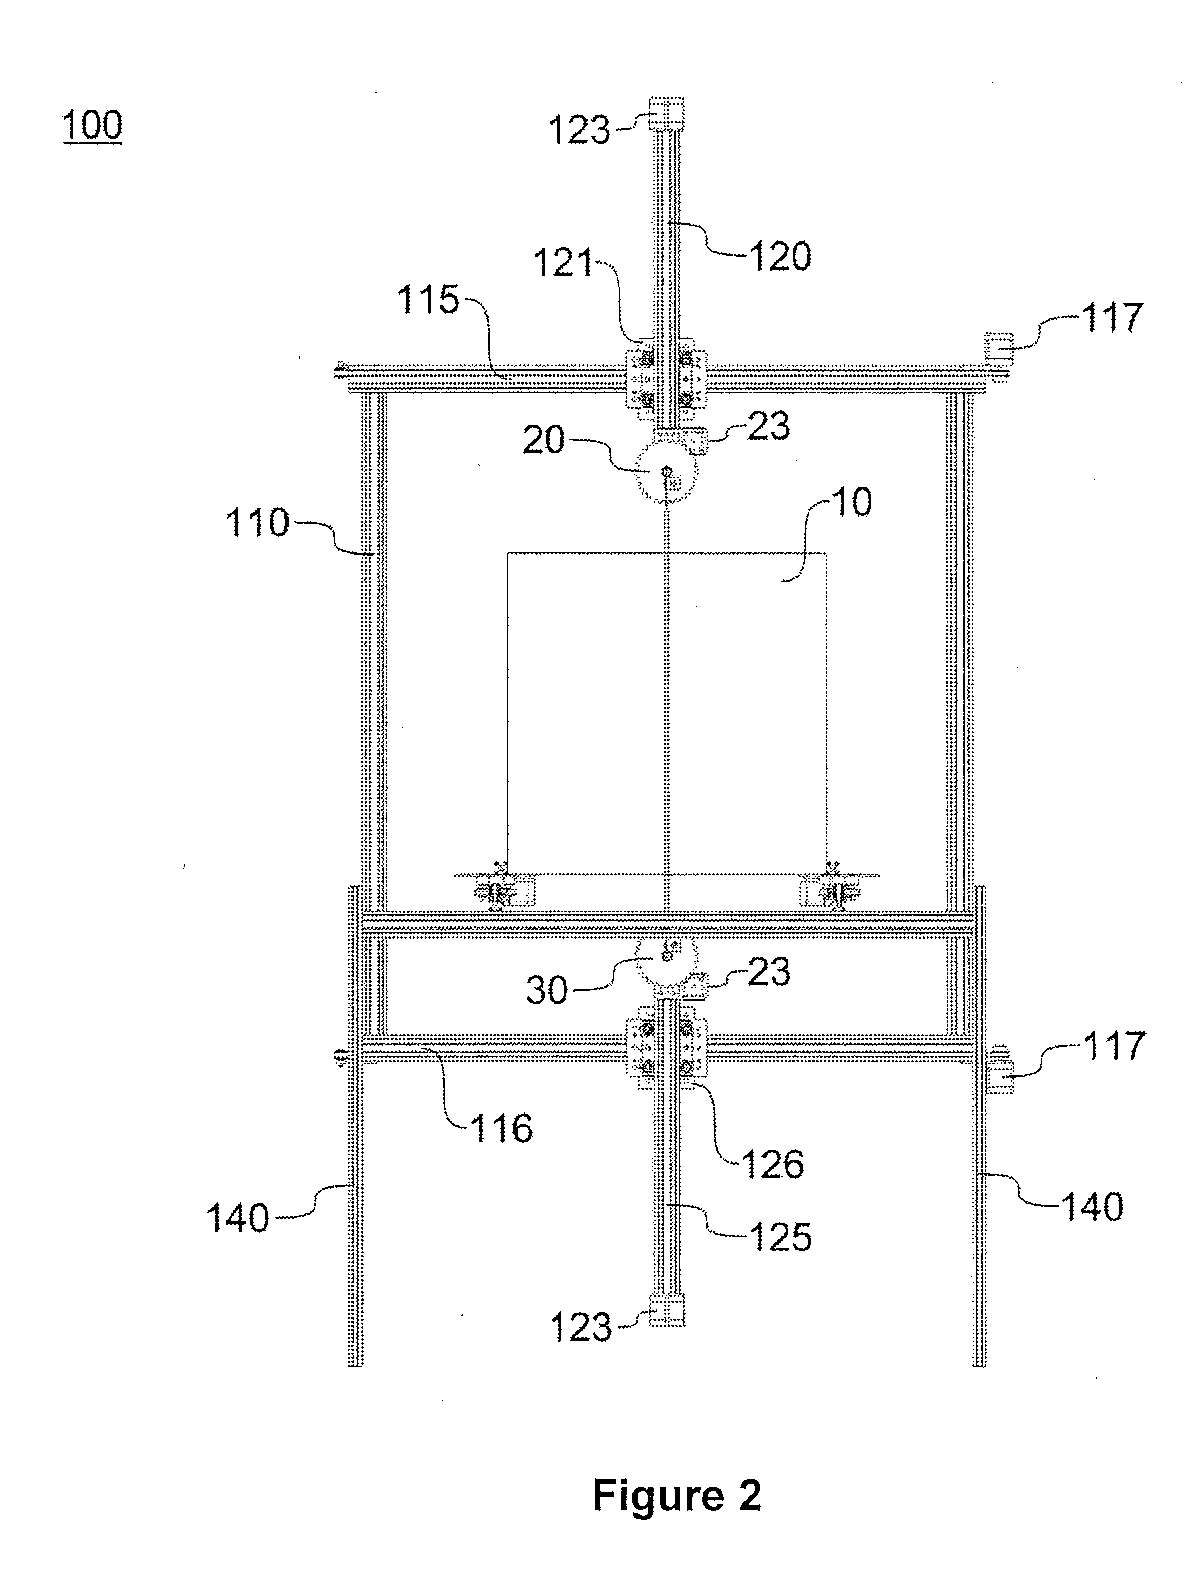 Device for cutting volumes of expanded polystyrene foam or similar, producing double-curvature surfaces